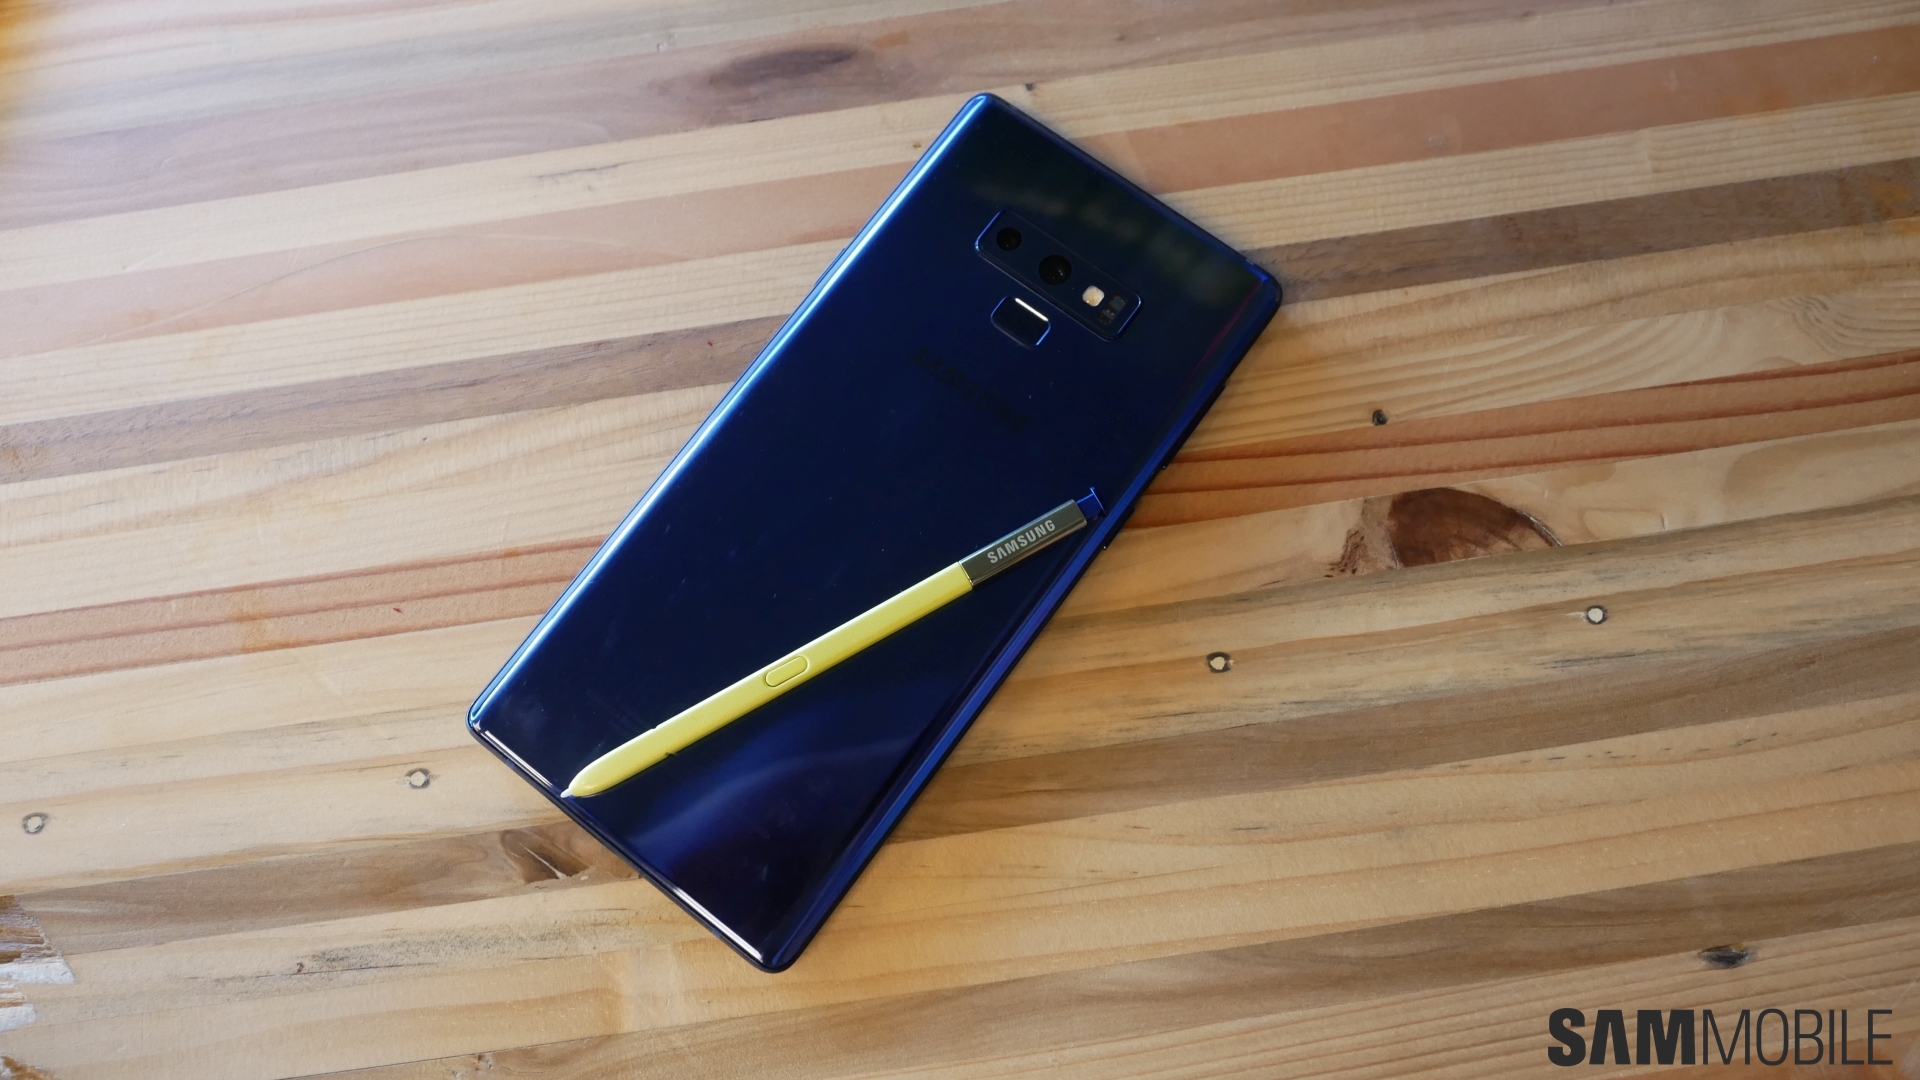 Galaxy Note 9 Wallpapers Are All Right Here - SlashGear